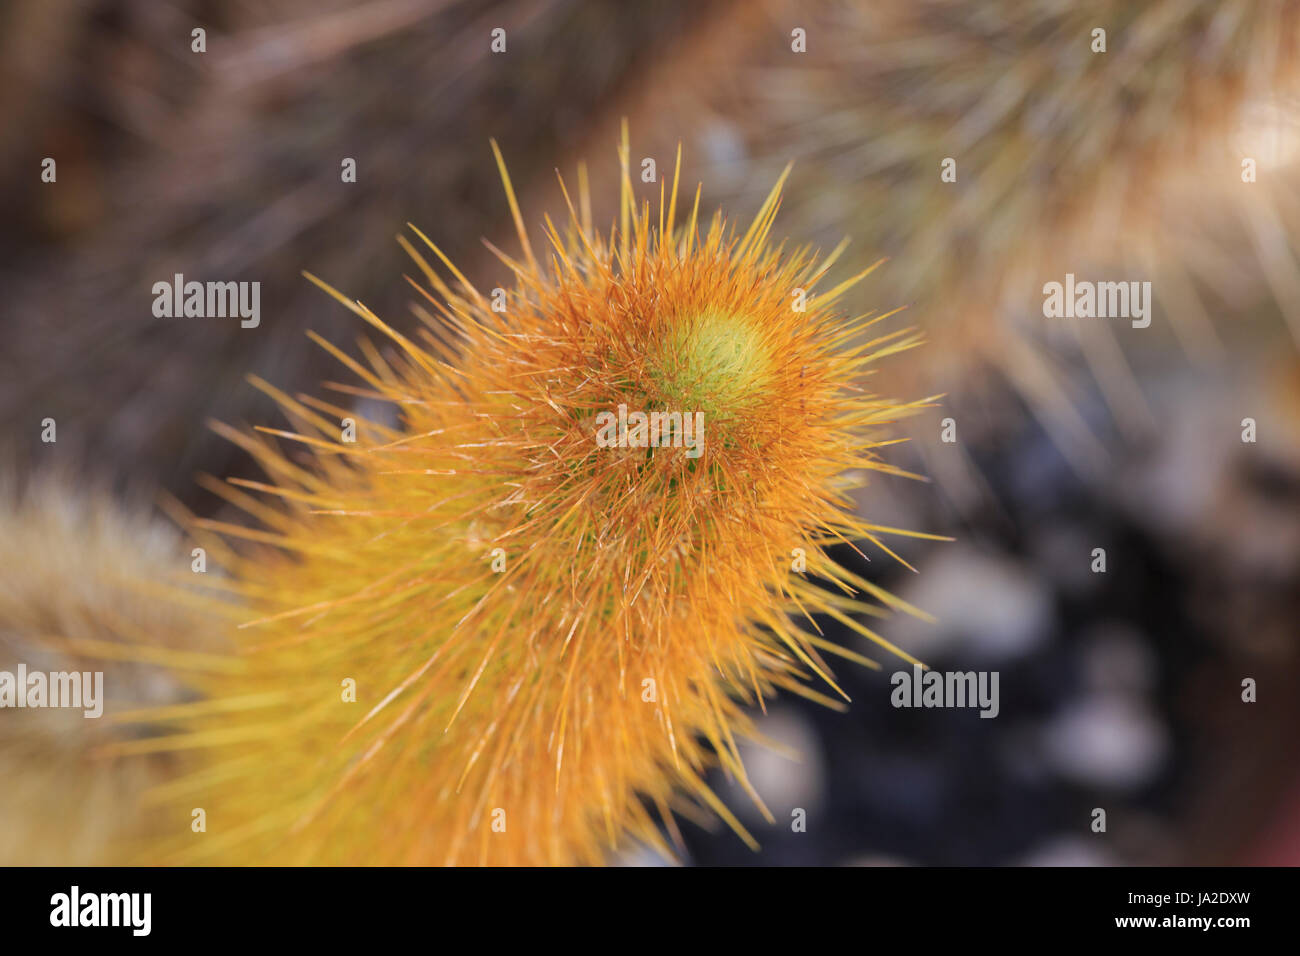 Golden torch cactus (Bergerocactus emoryi) detail of the edge with spines Stock Photo